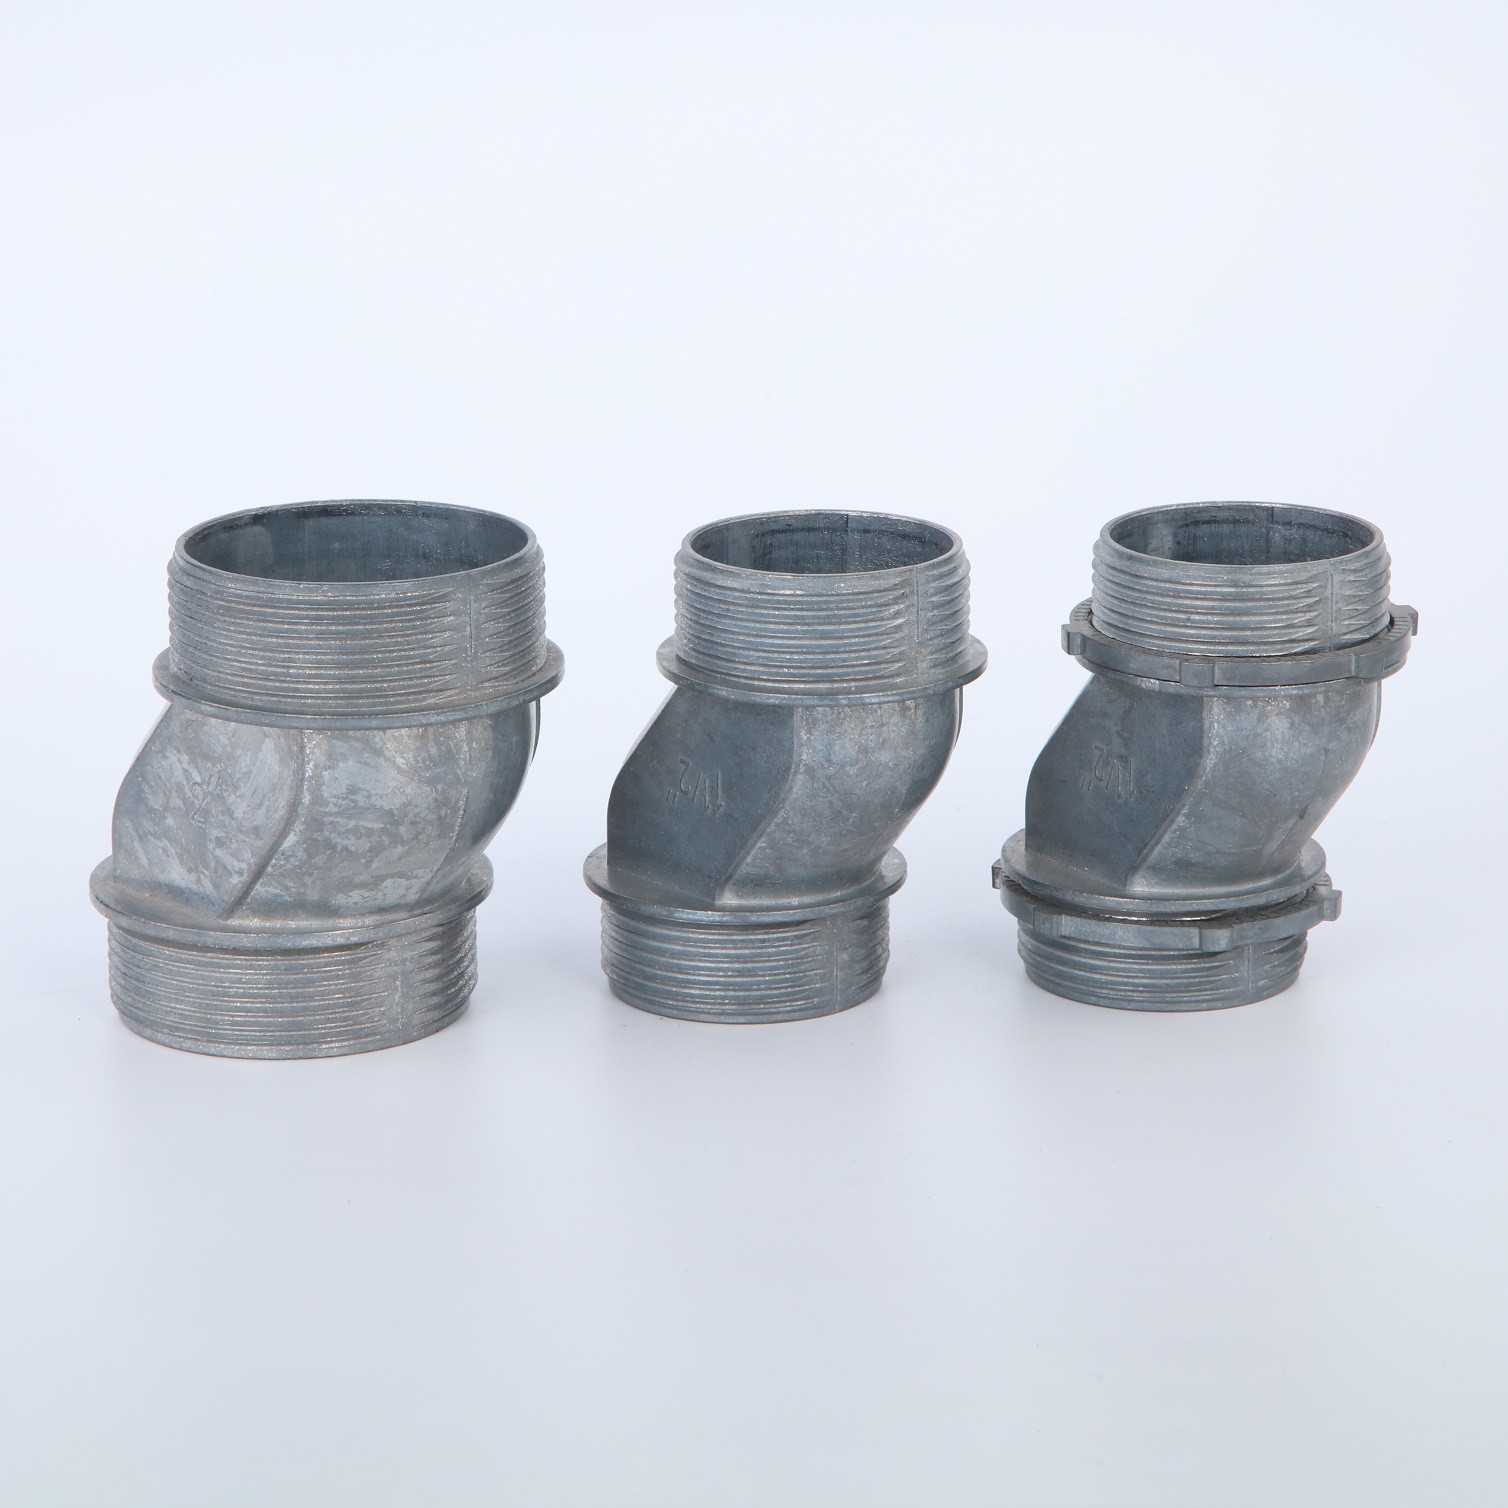 Best 1-1/4&quot; Rigid Conduit Offset Connector 45 Degree Pipe Connector To Steel Outlet Box Zinc Die Casting NPT Threads UL List wholesale